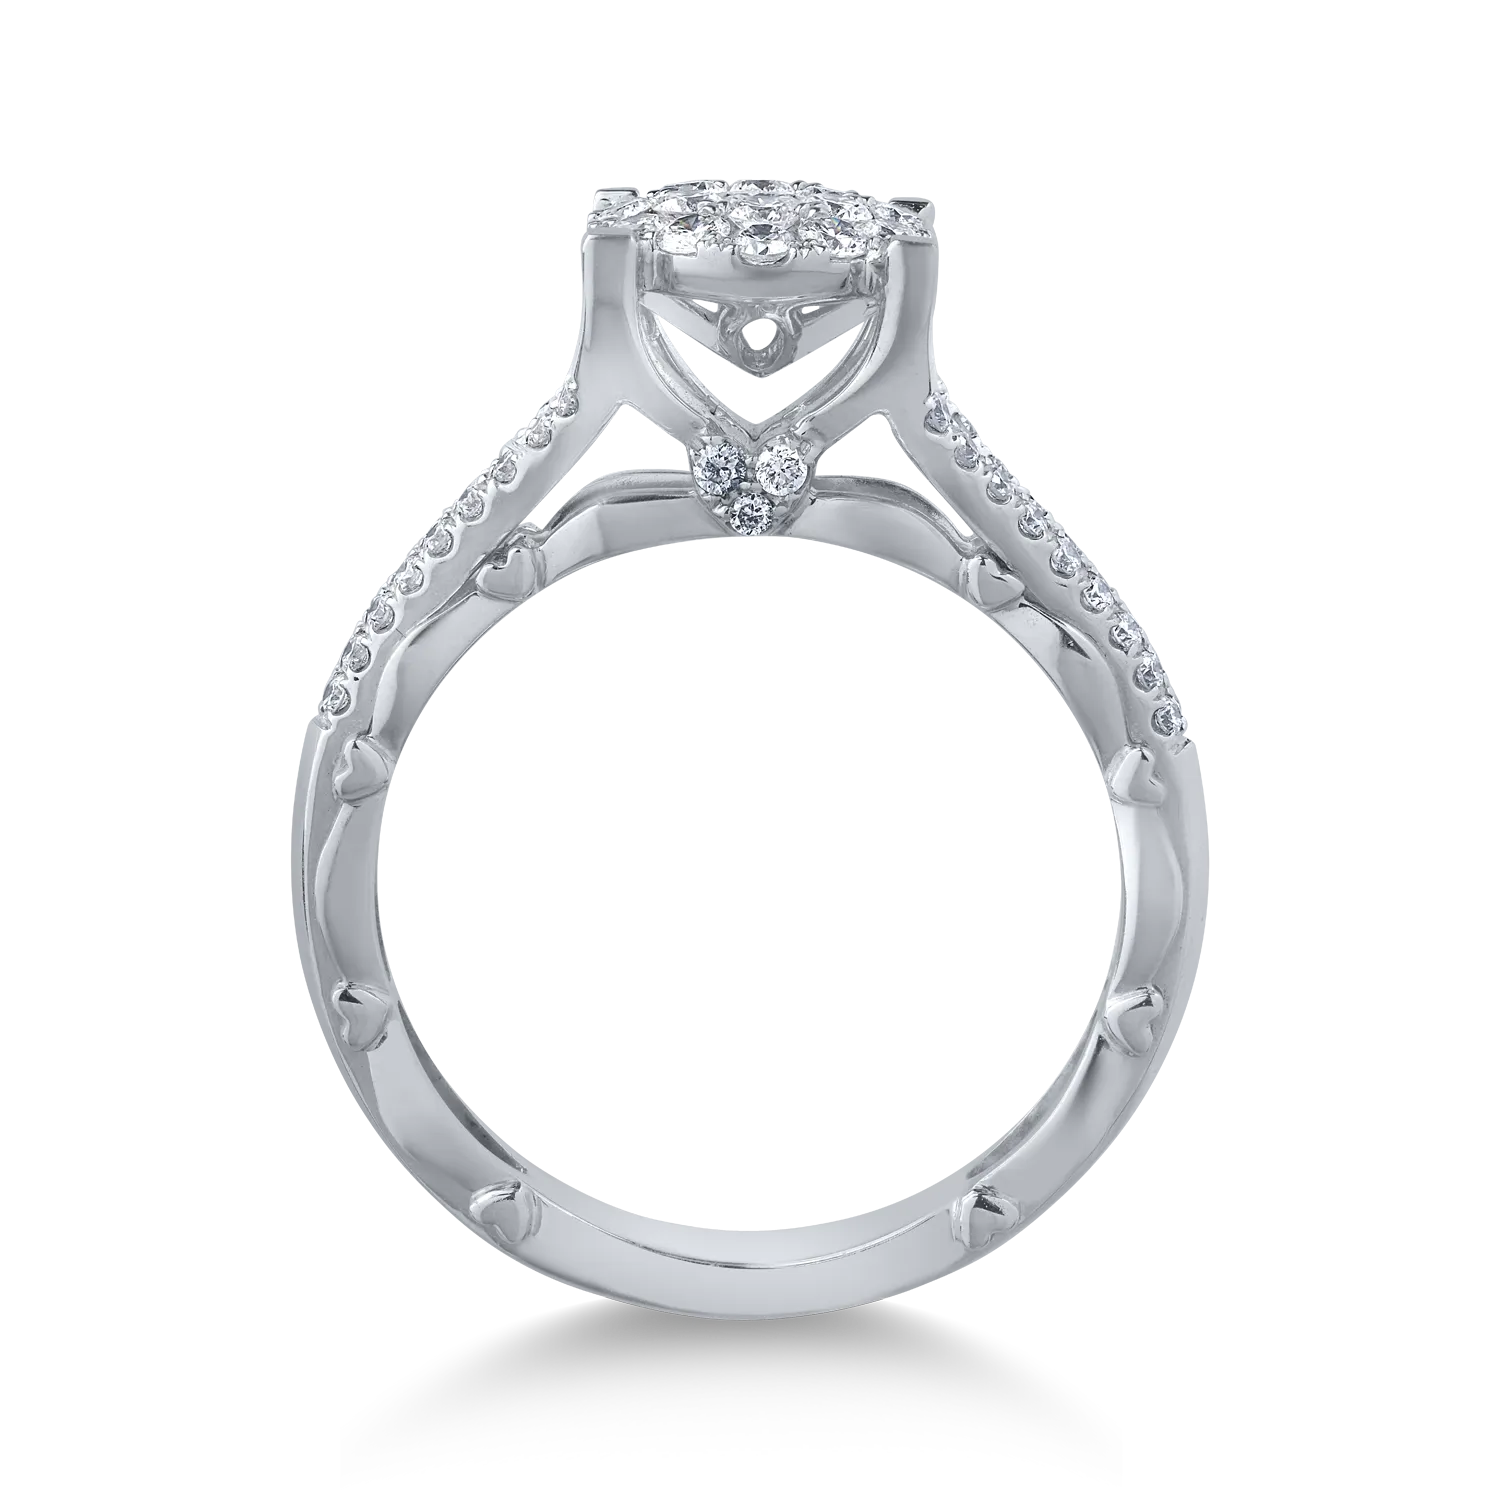 18K white gold ring with 0.51ct diamonds